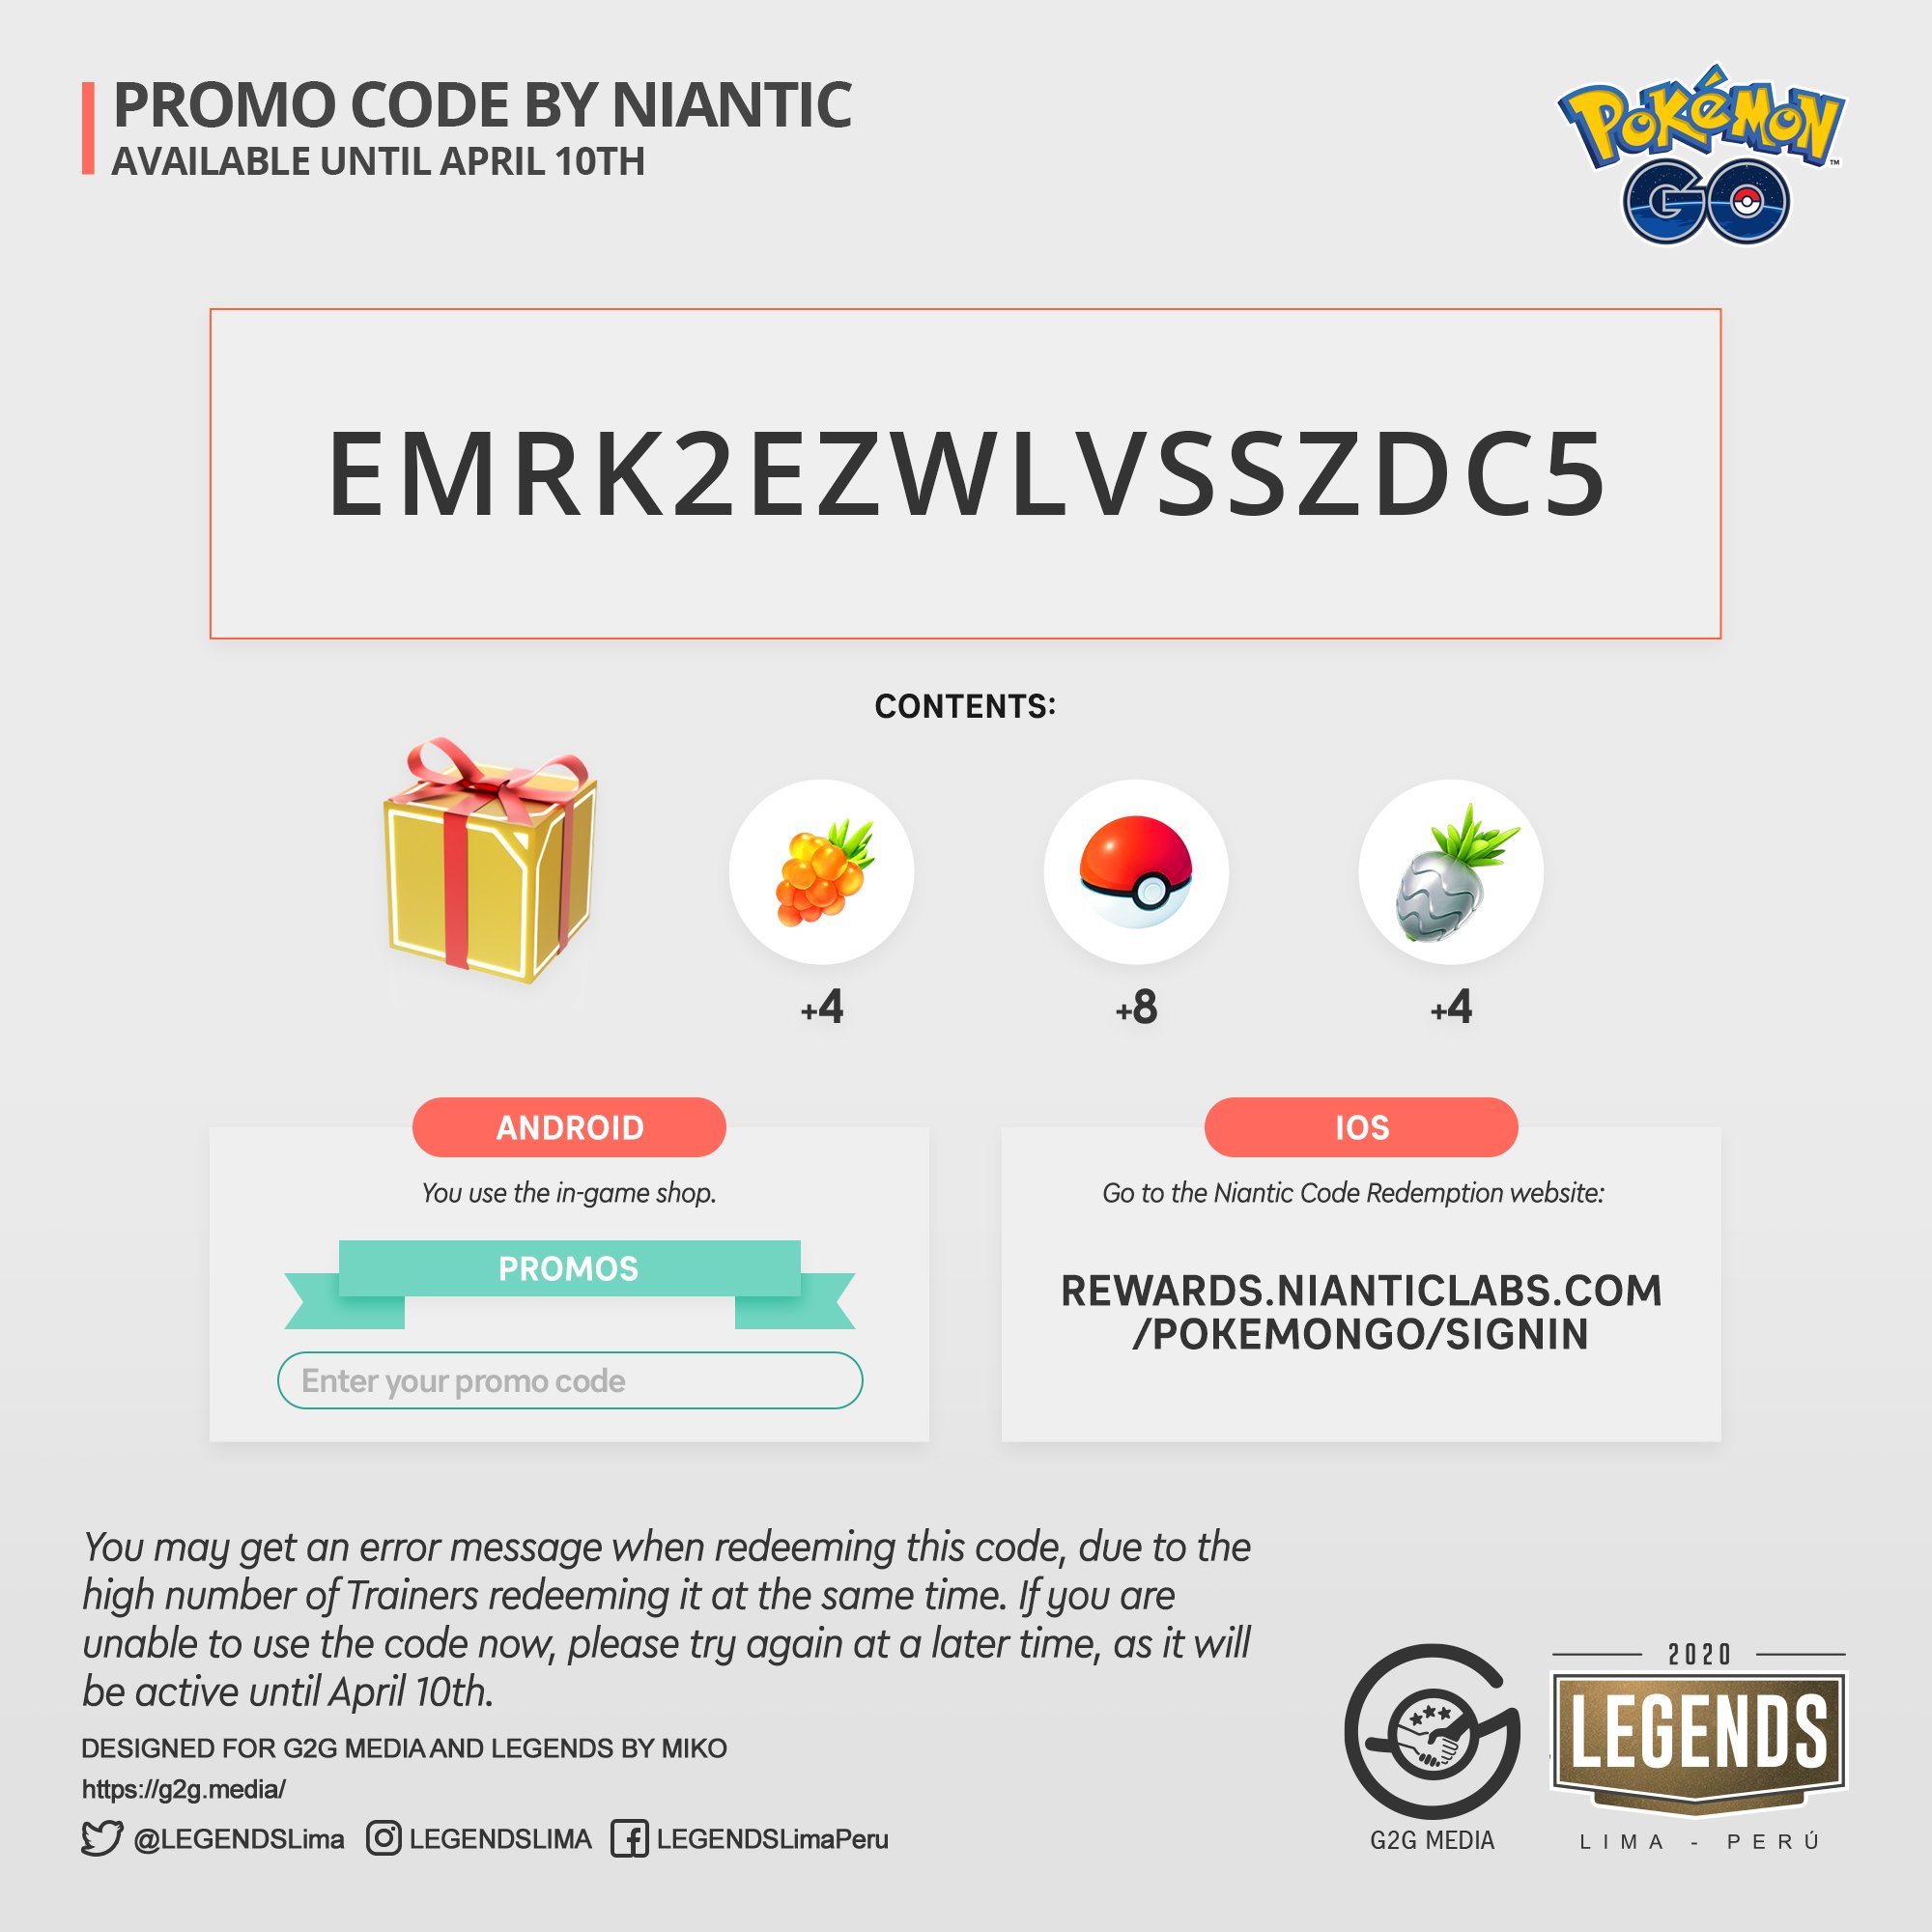 Pokemon GO Promo Codes LIVE: Niantic's new update following news